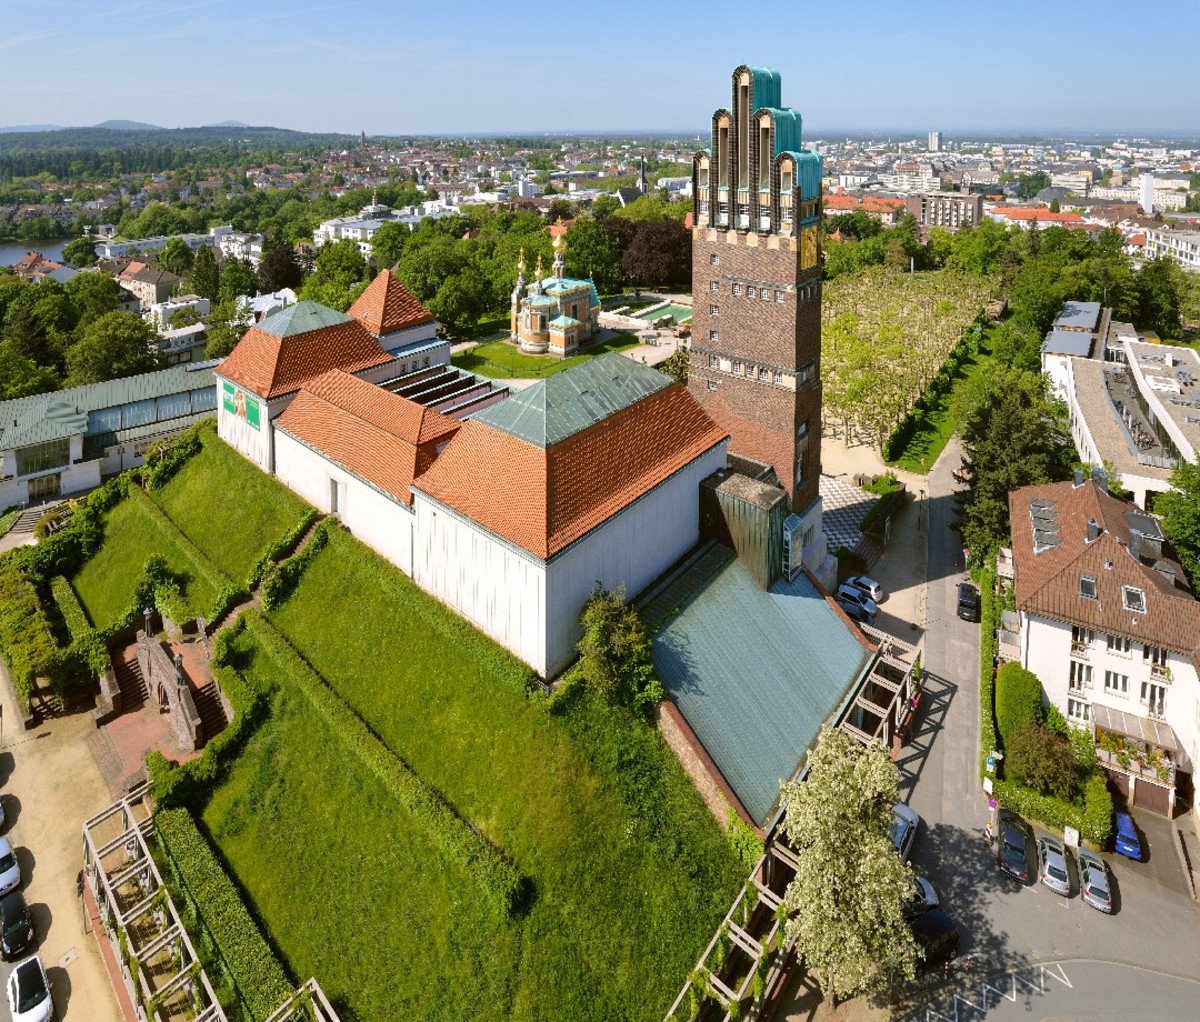 An aerial view of the distinctive architecture and landscaping of Darmstadt.